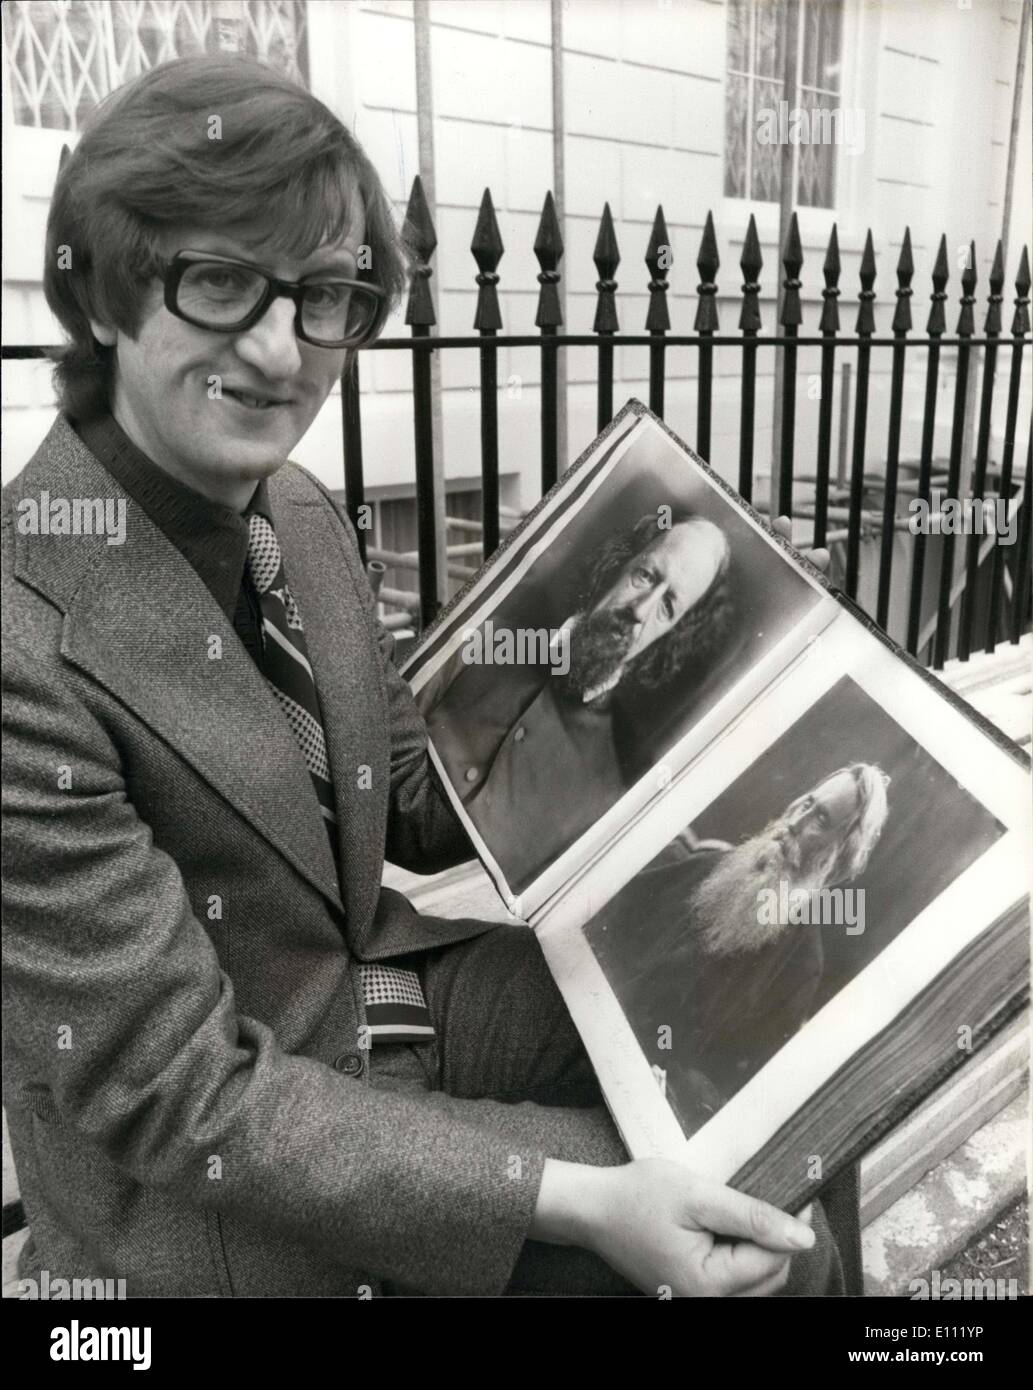 Jan. 07, 1975 - Appeal to keep album of Photographs: The photography is sponsoring an appeal aimed at raising 52,000 - the sum Stock Photo